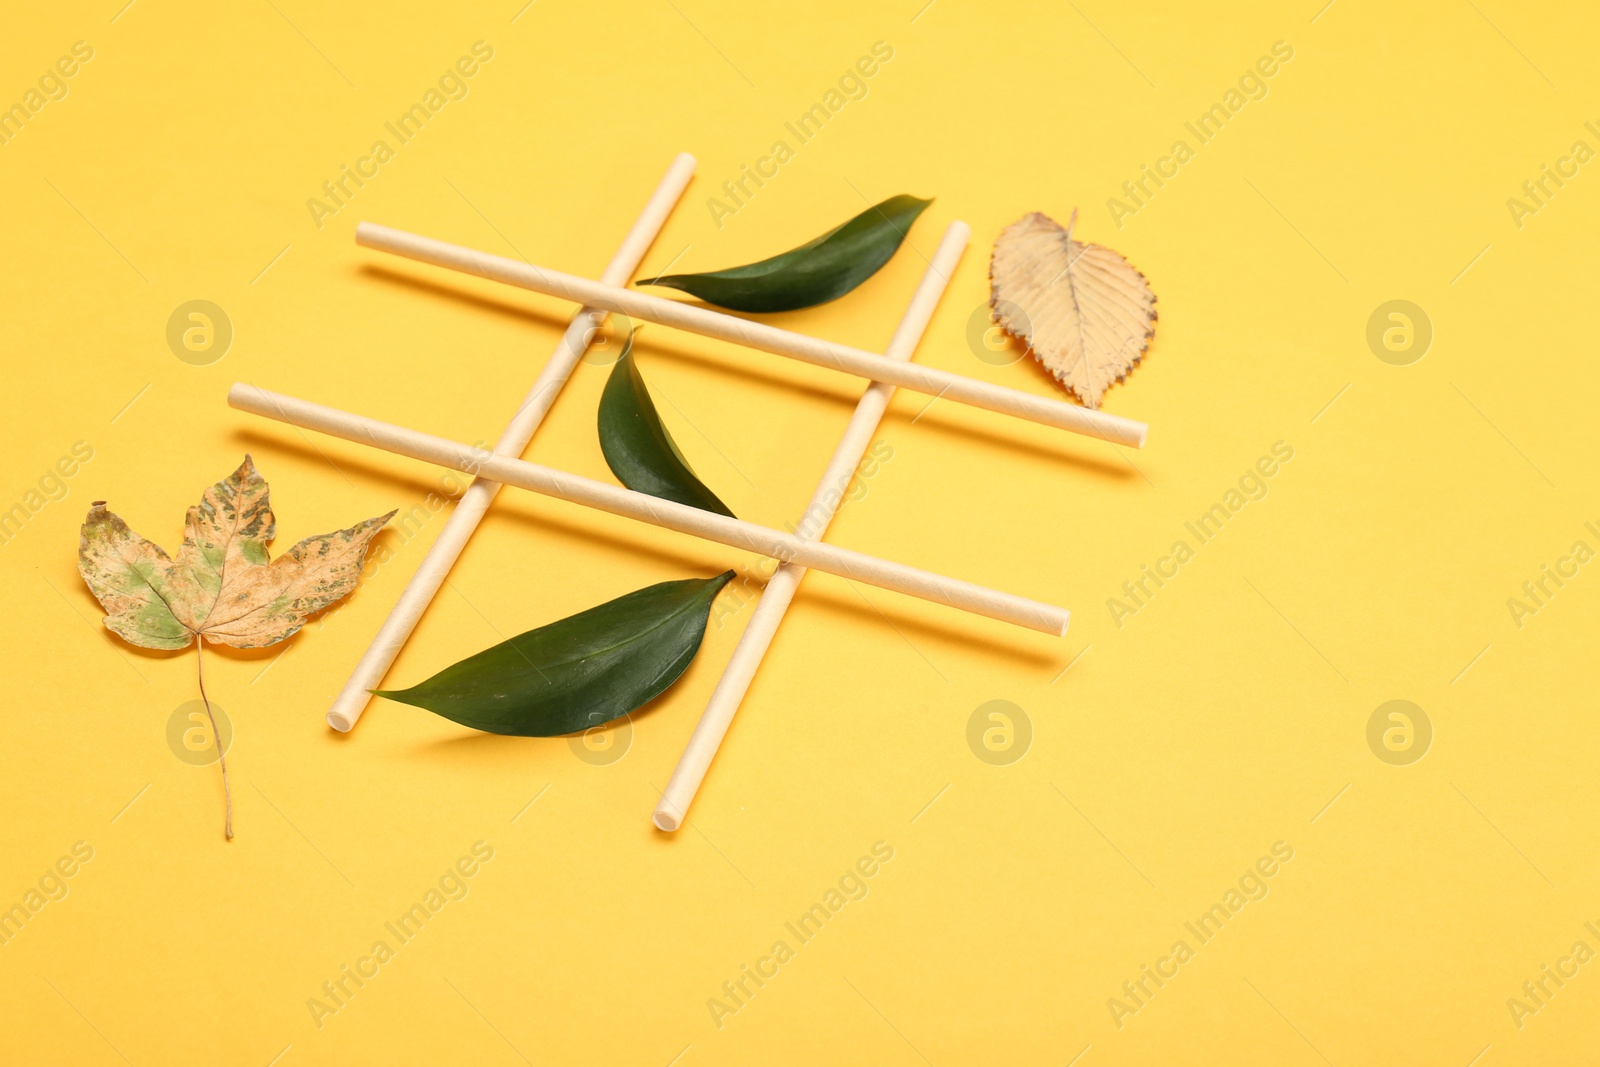 Photo of Tic tac toe game made with fresh and dry leaves on yellow background, space for text